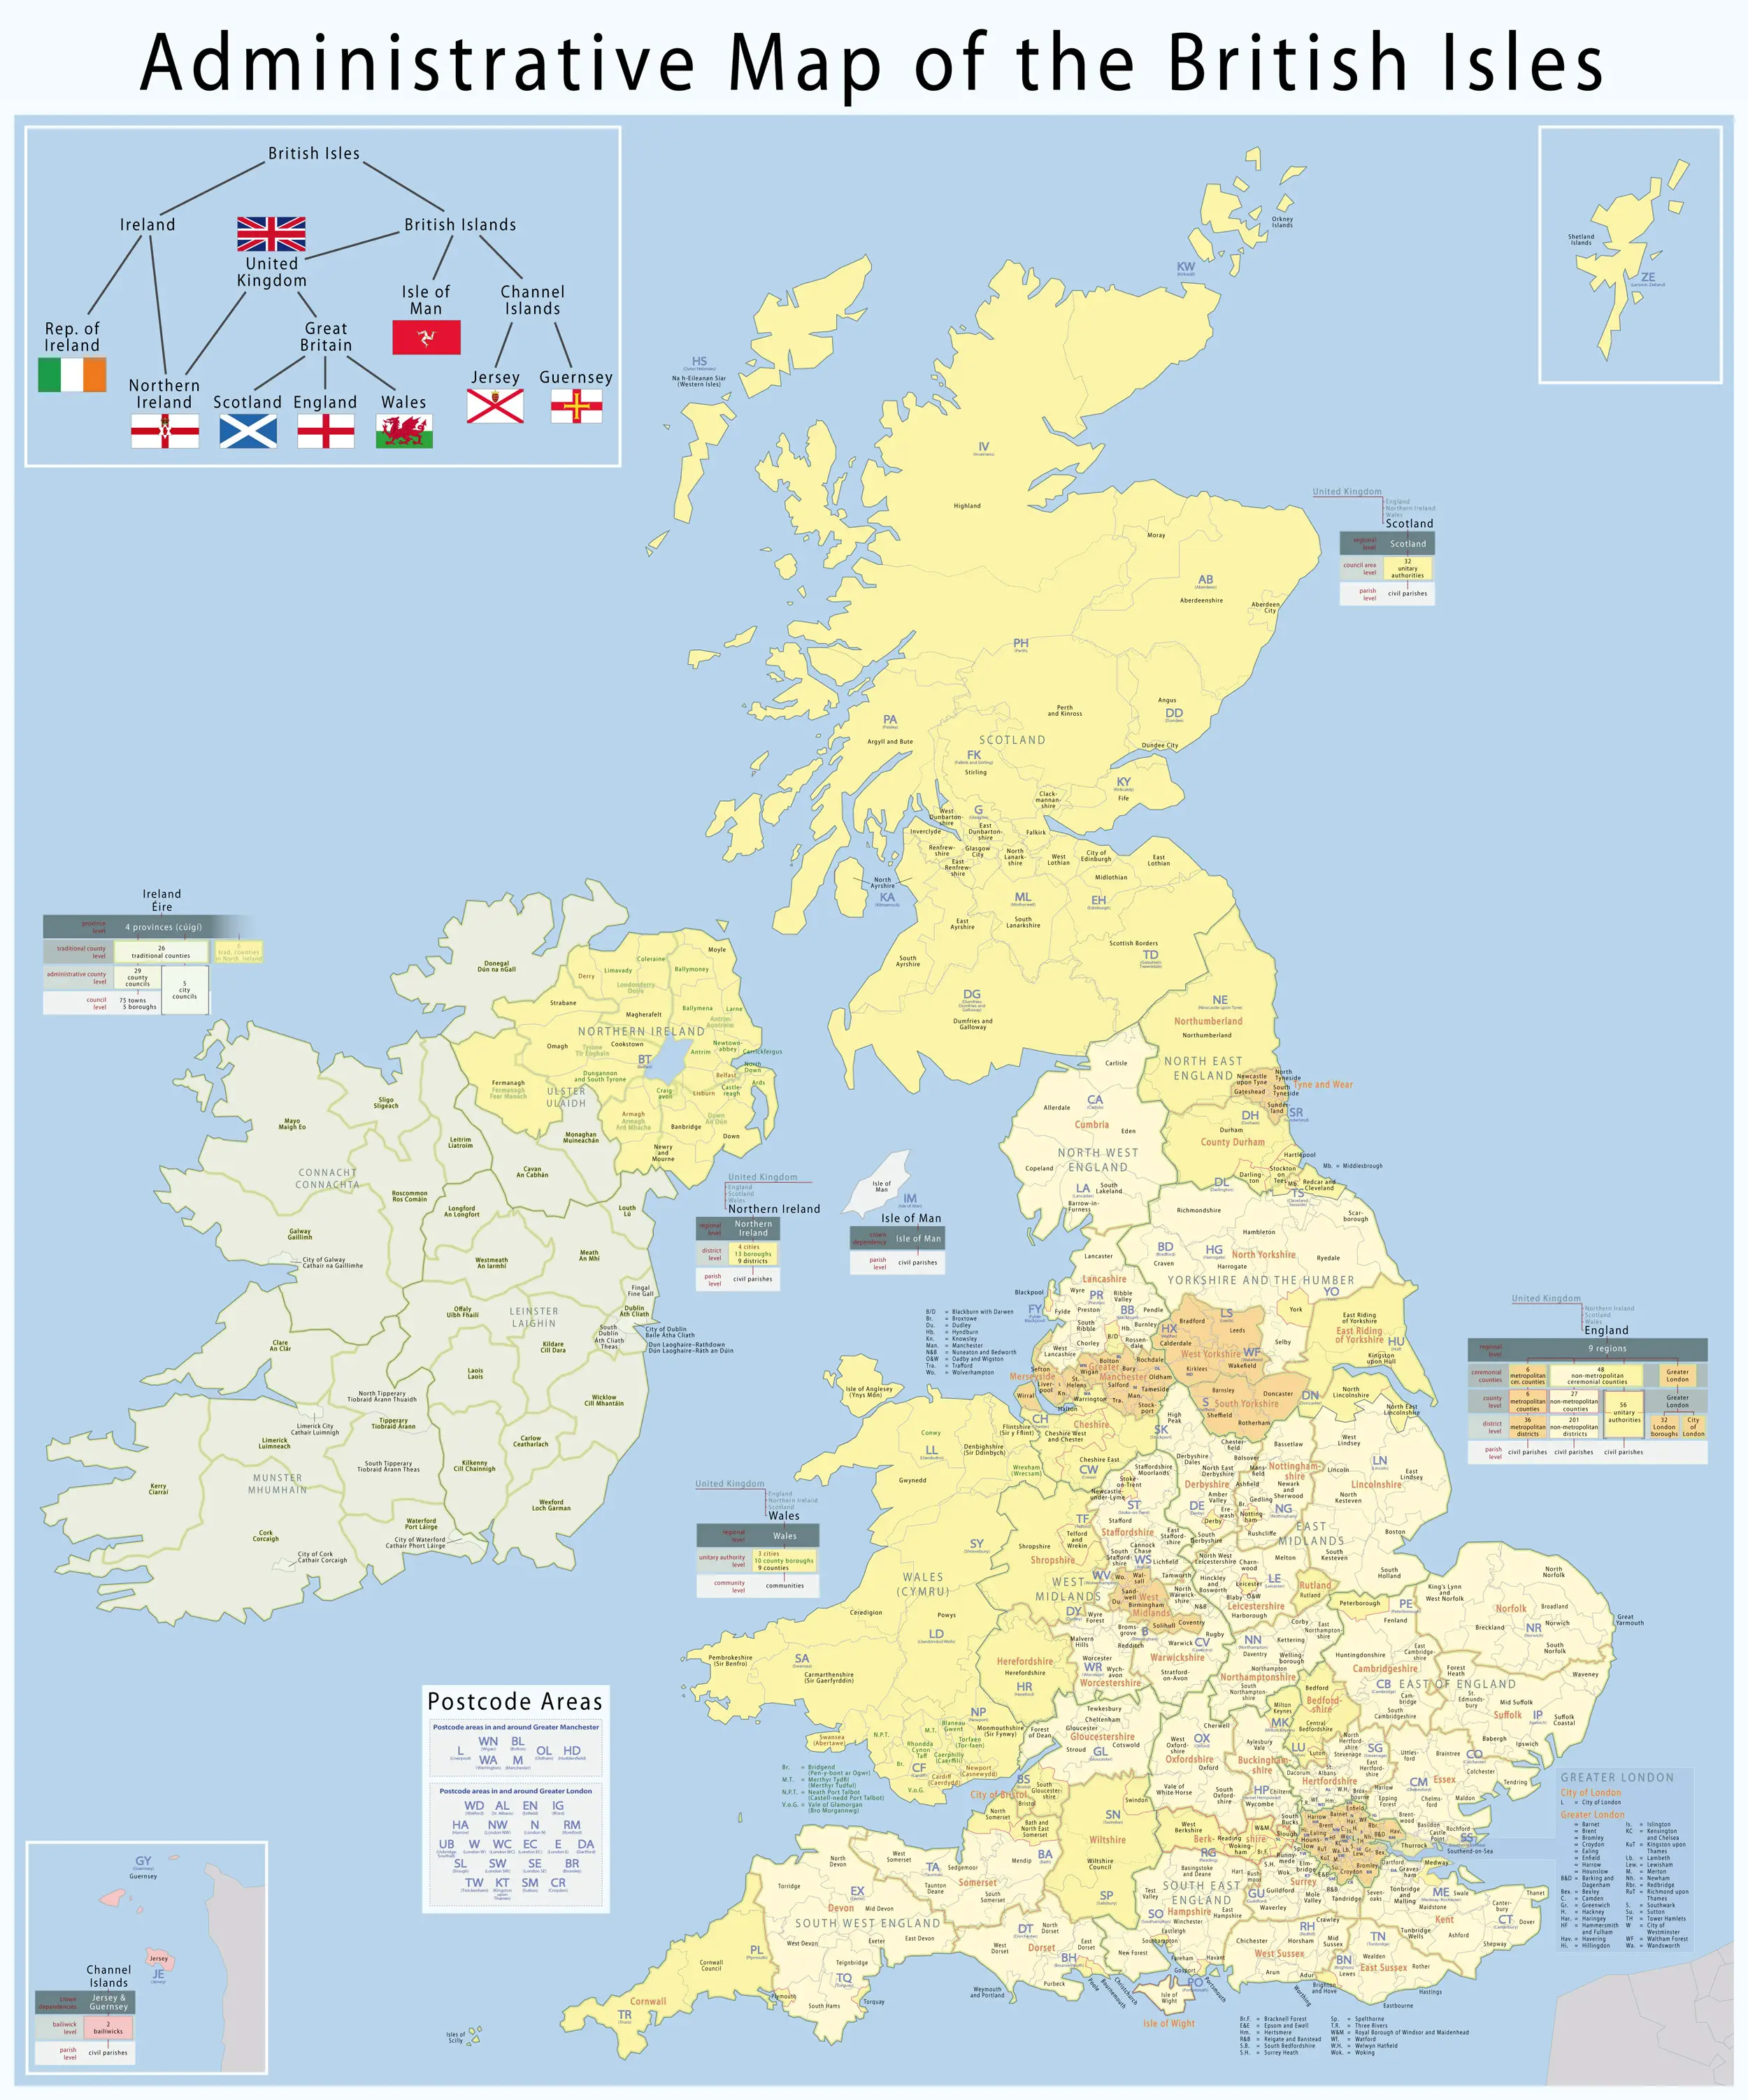 Administrative Geography Of The British Isles With Postcode Areas